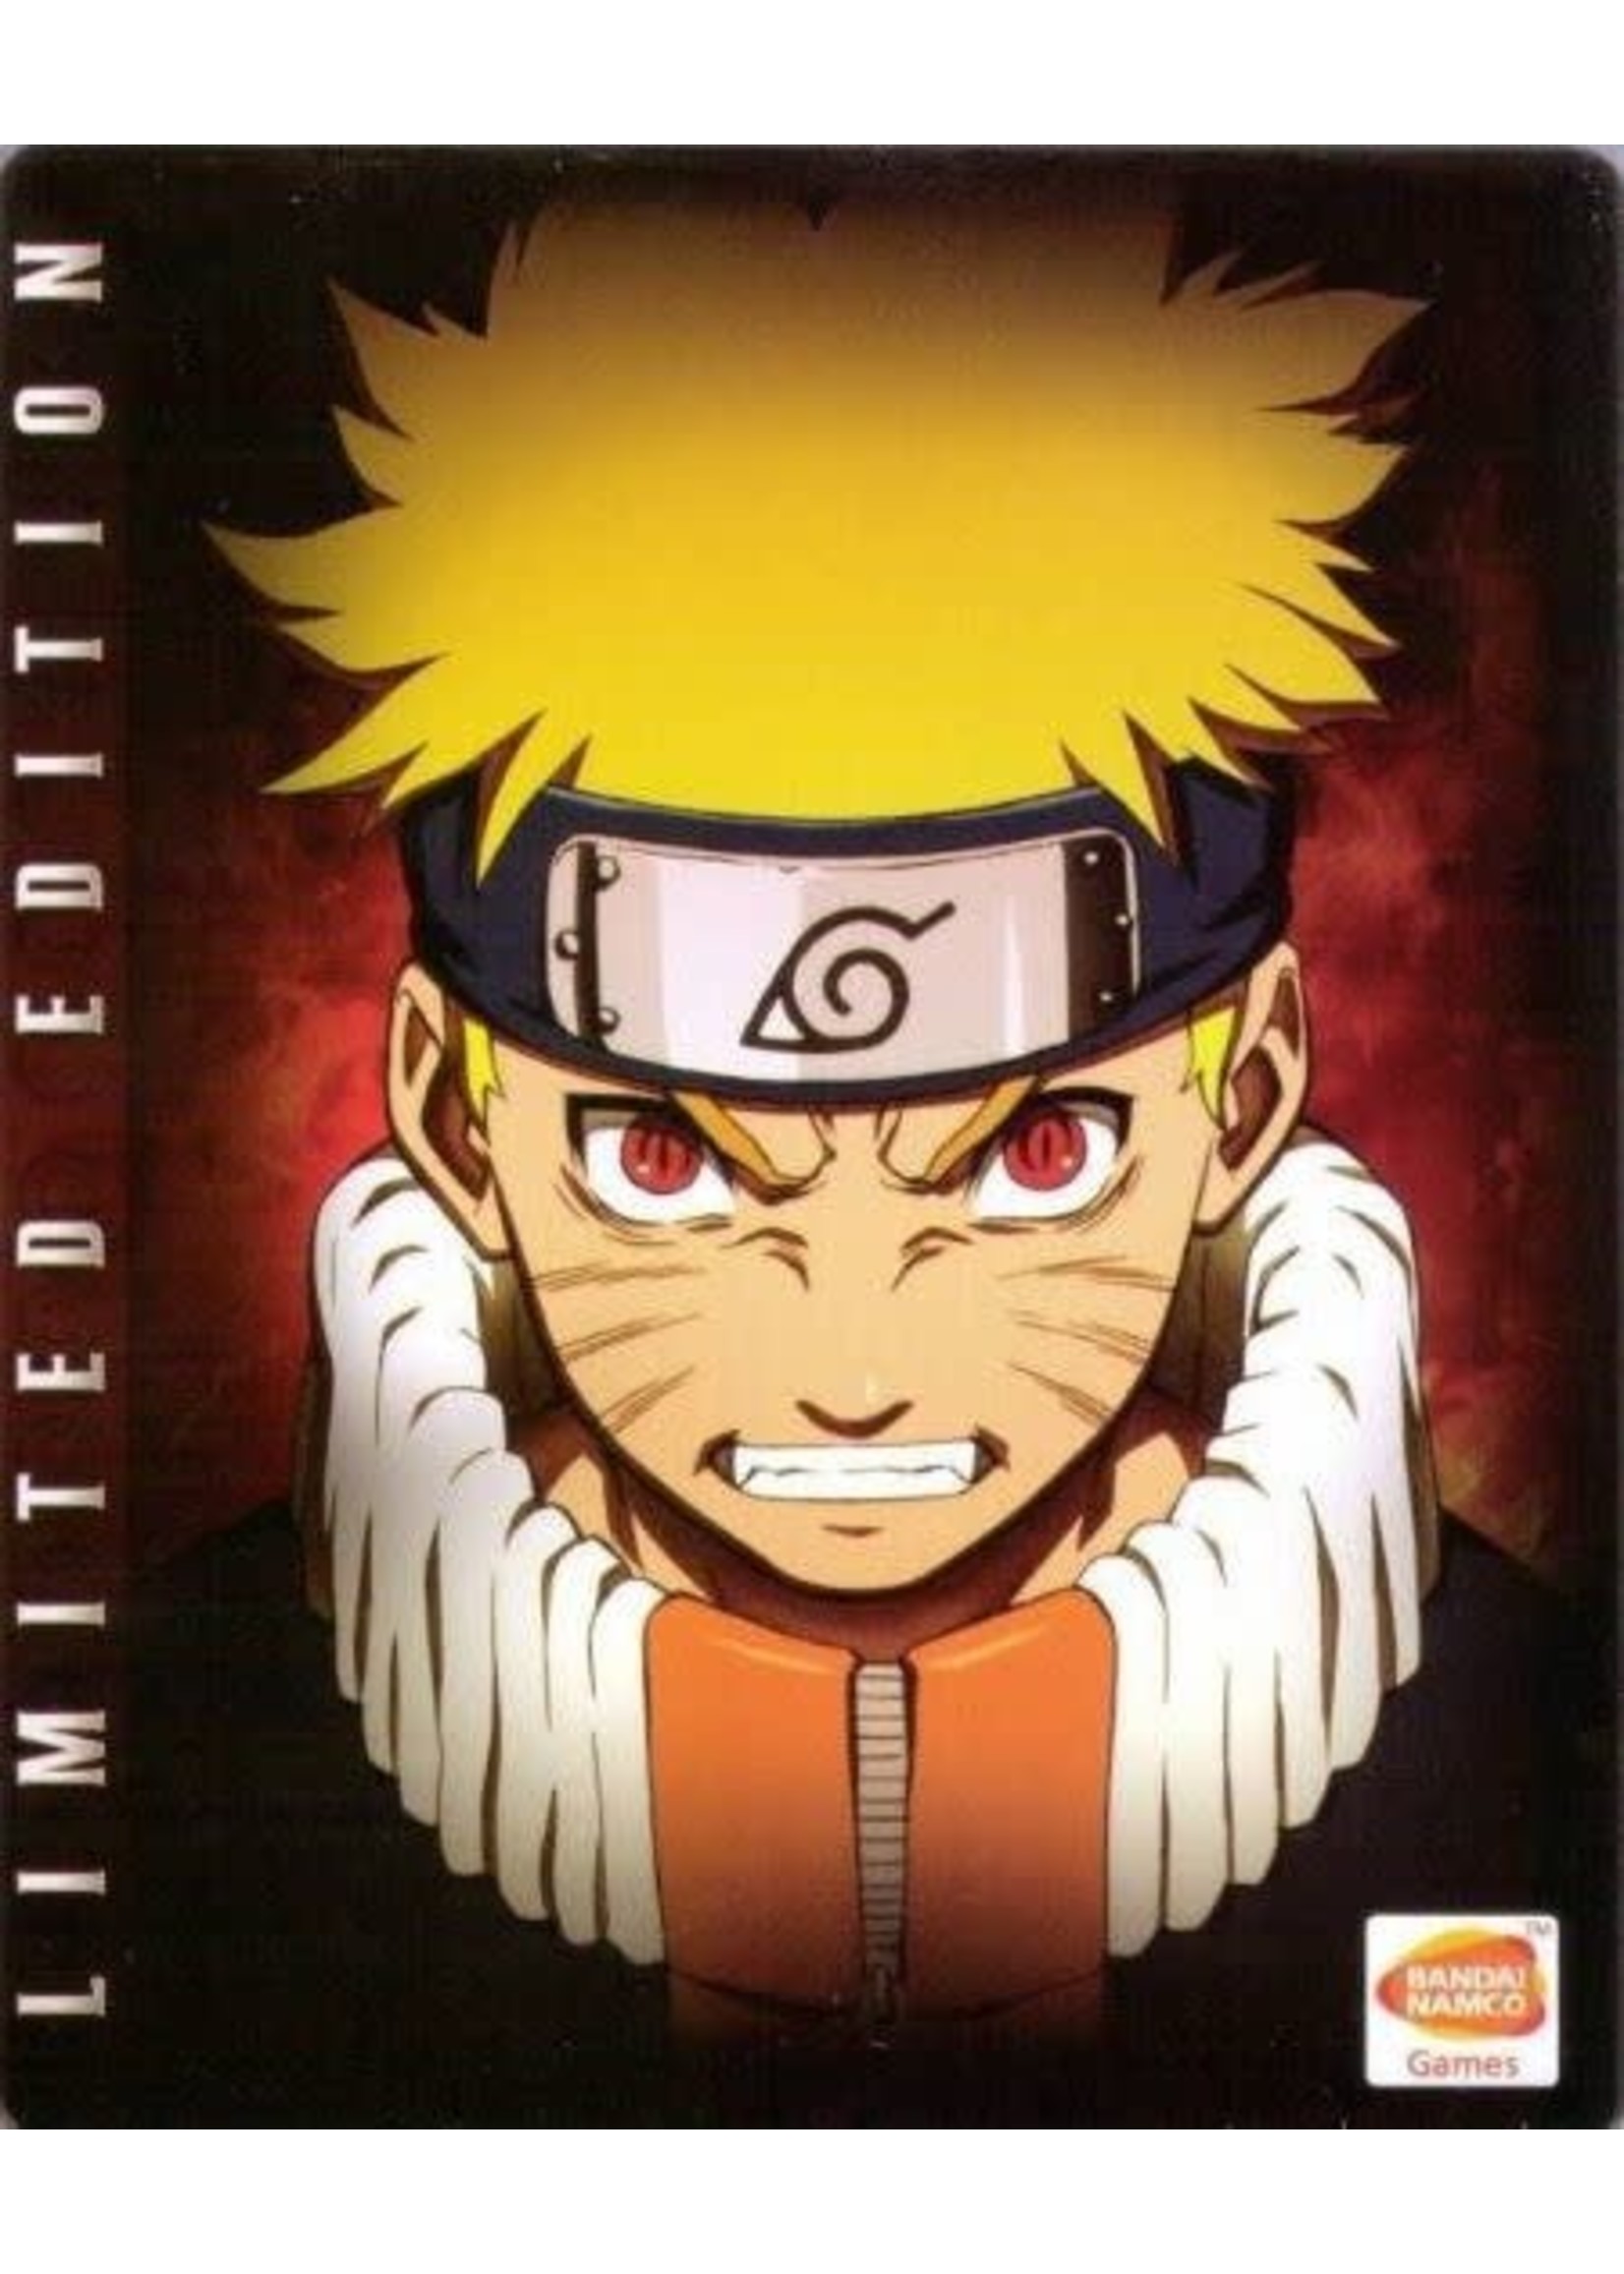 noedels Leger Overlappen Naruto Shippuden: Ultimate Ninja Storm [Limited Edition Steelbook] (PS3) -  King of Trade